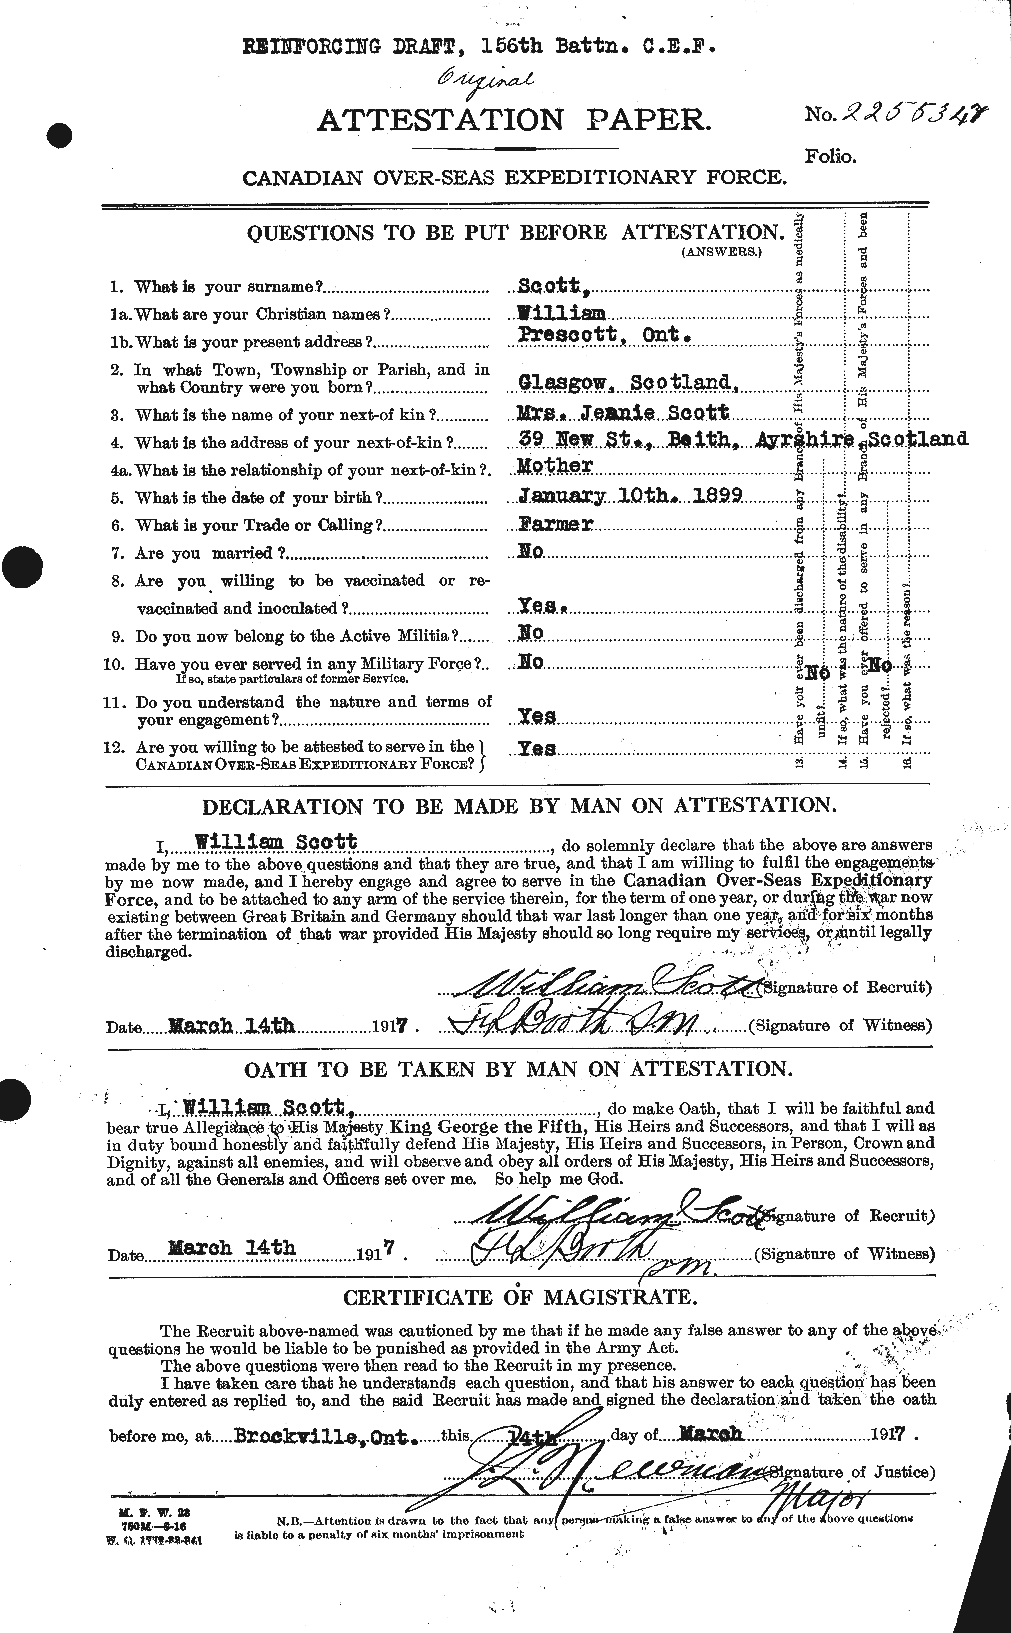 Personnel Records of the First World War - CEF 087664a